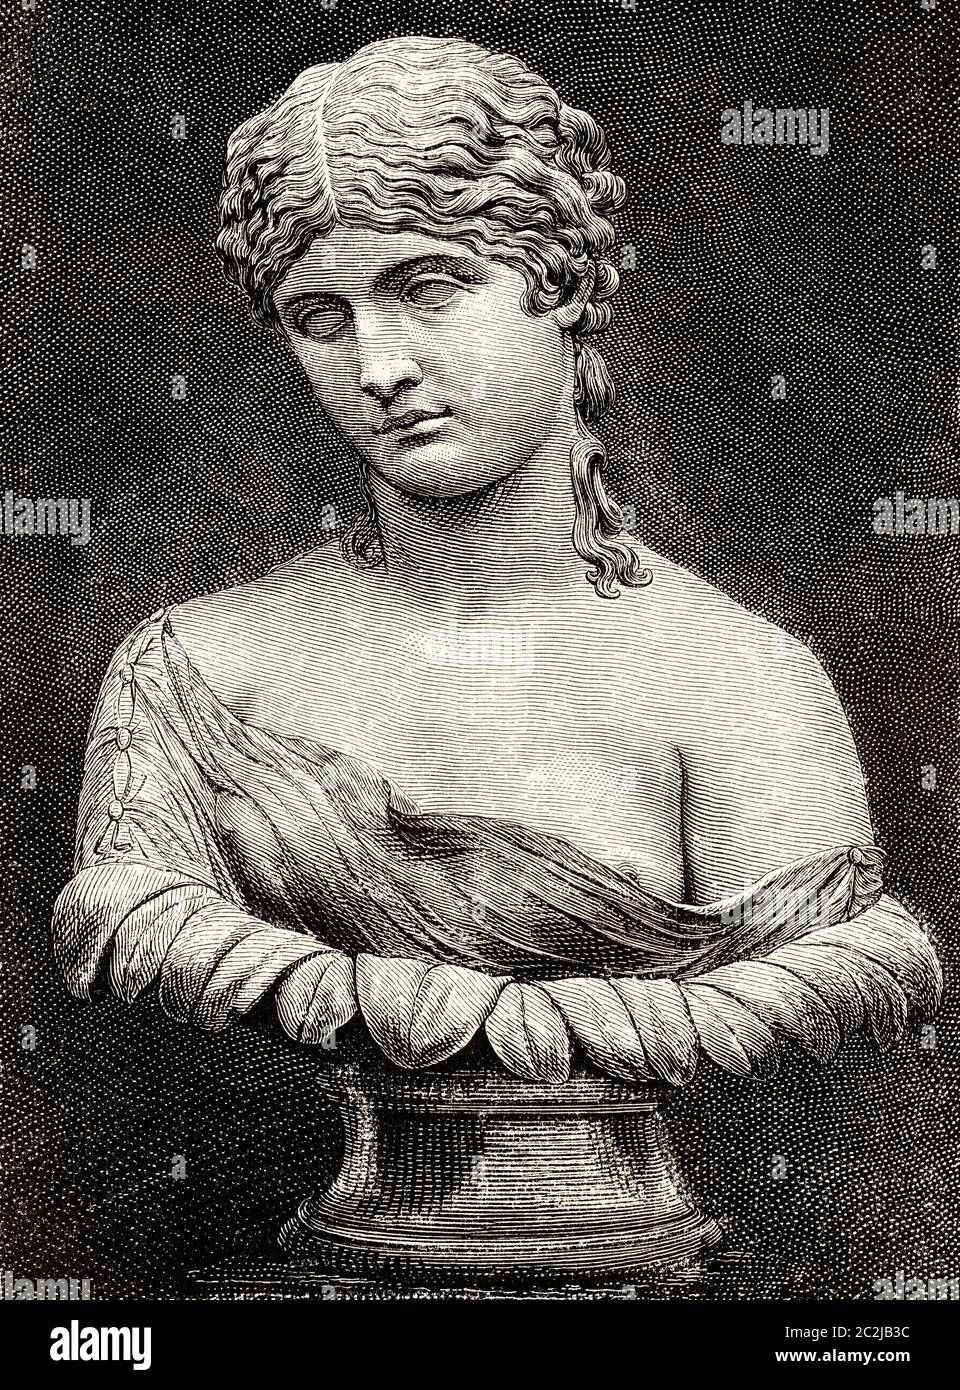 Greek mythology. Marble bust of Klytia nymph in love with Helios, she spied on him daily. The gods turned her into a heliotrope. Greek mythology, anciente Greece. Old 19th century engraved illustration, El Mundo Ilustrado 1880 Stock Photo